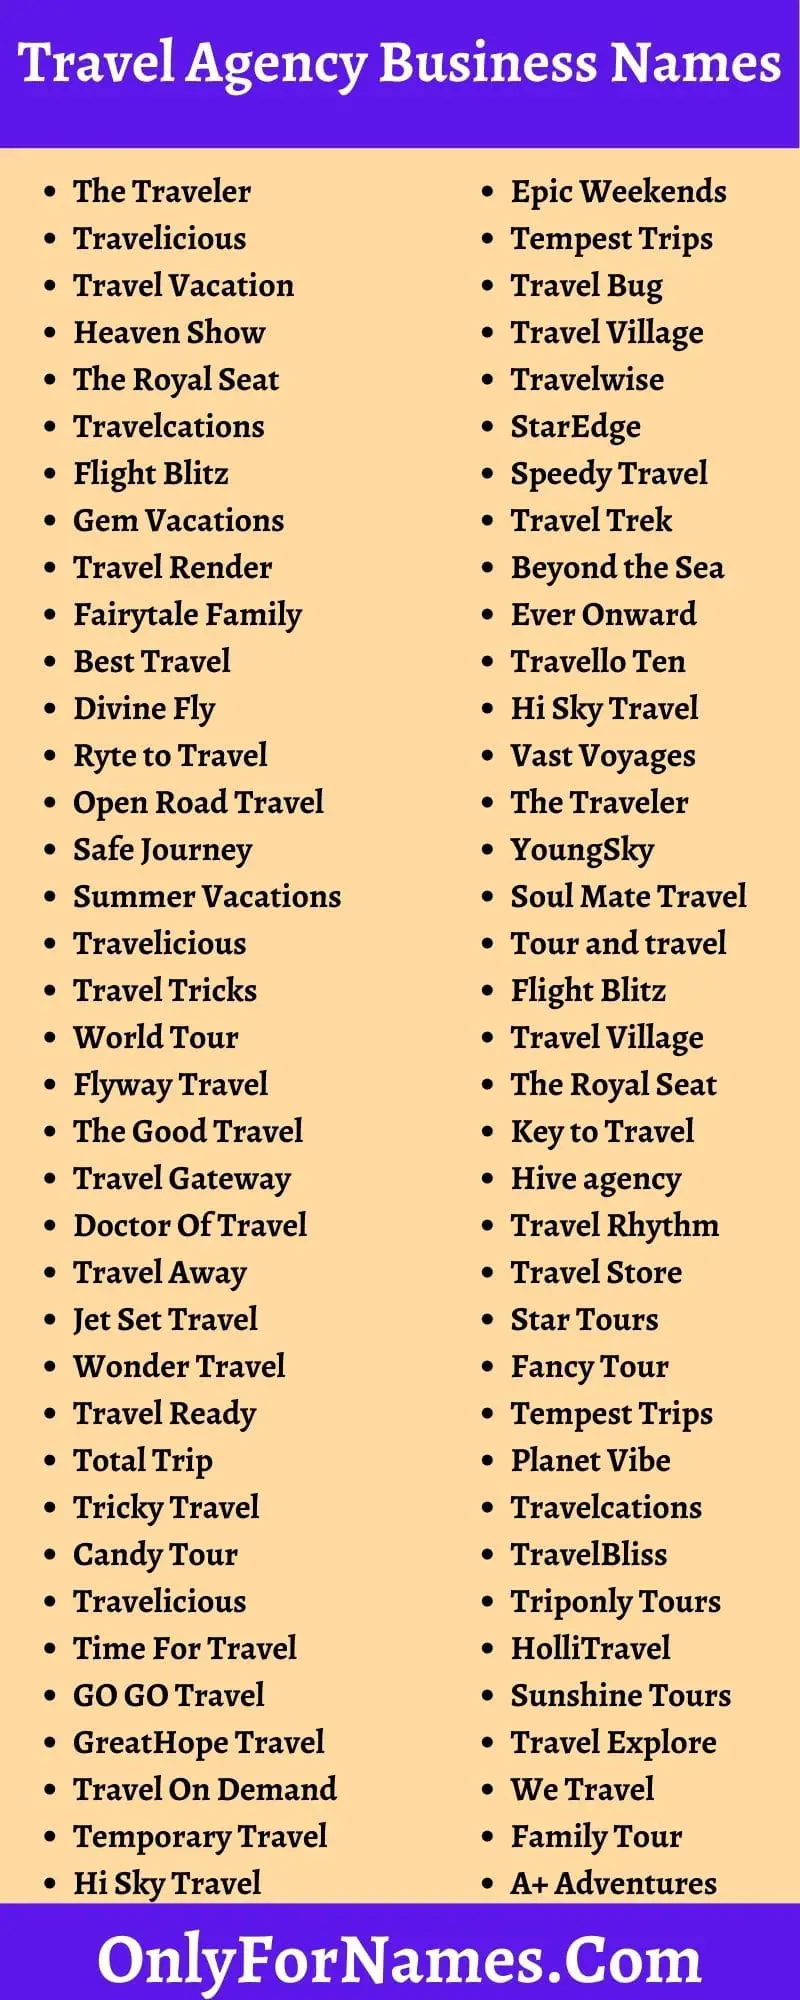 Travel Agency Business Names